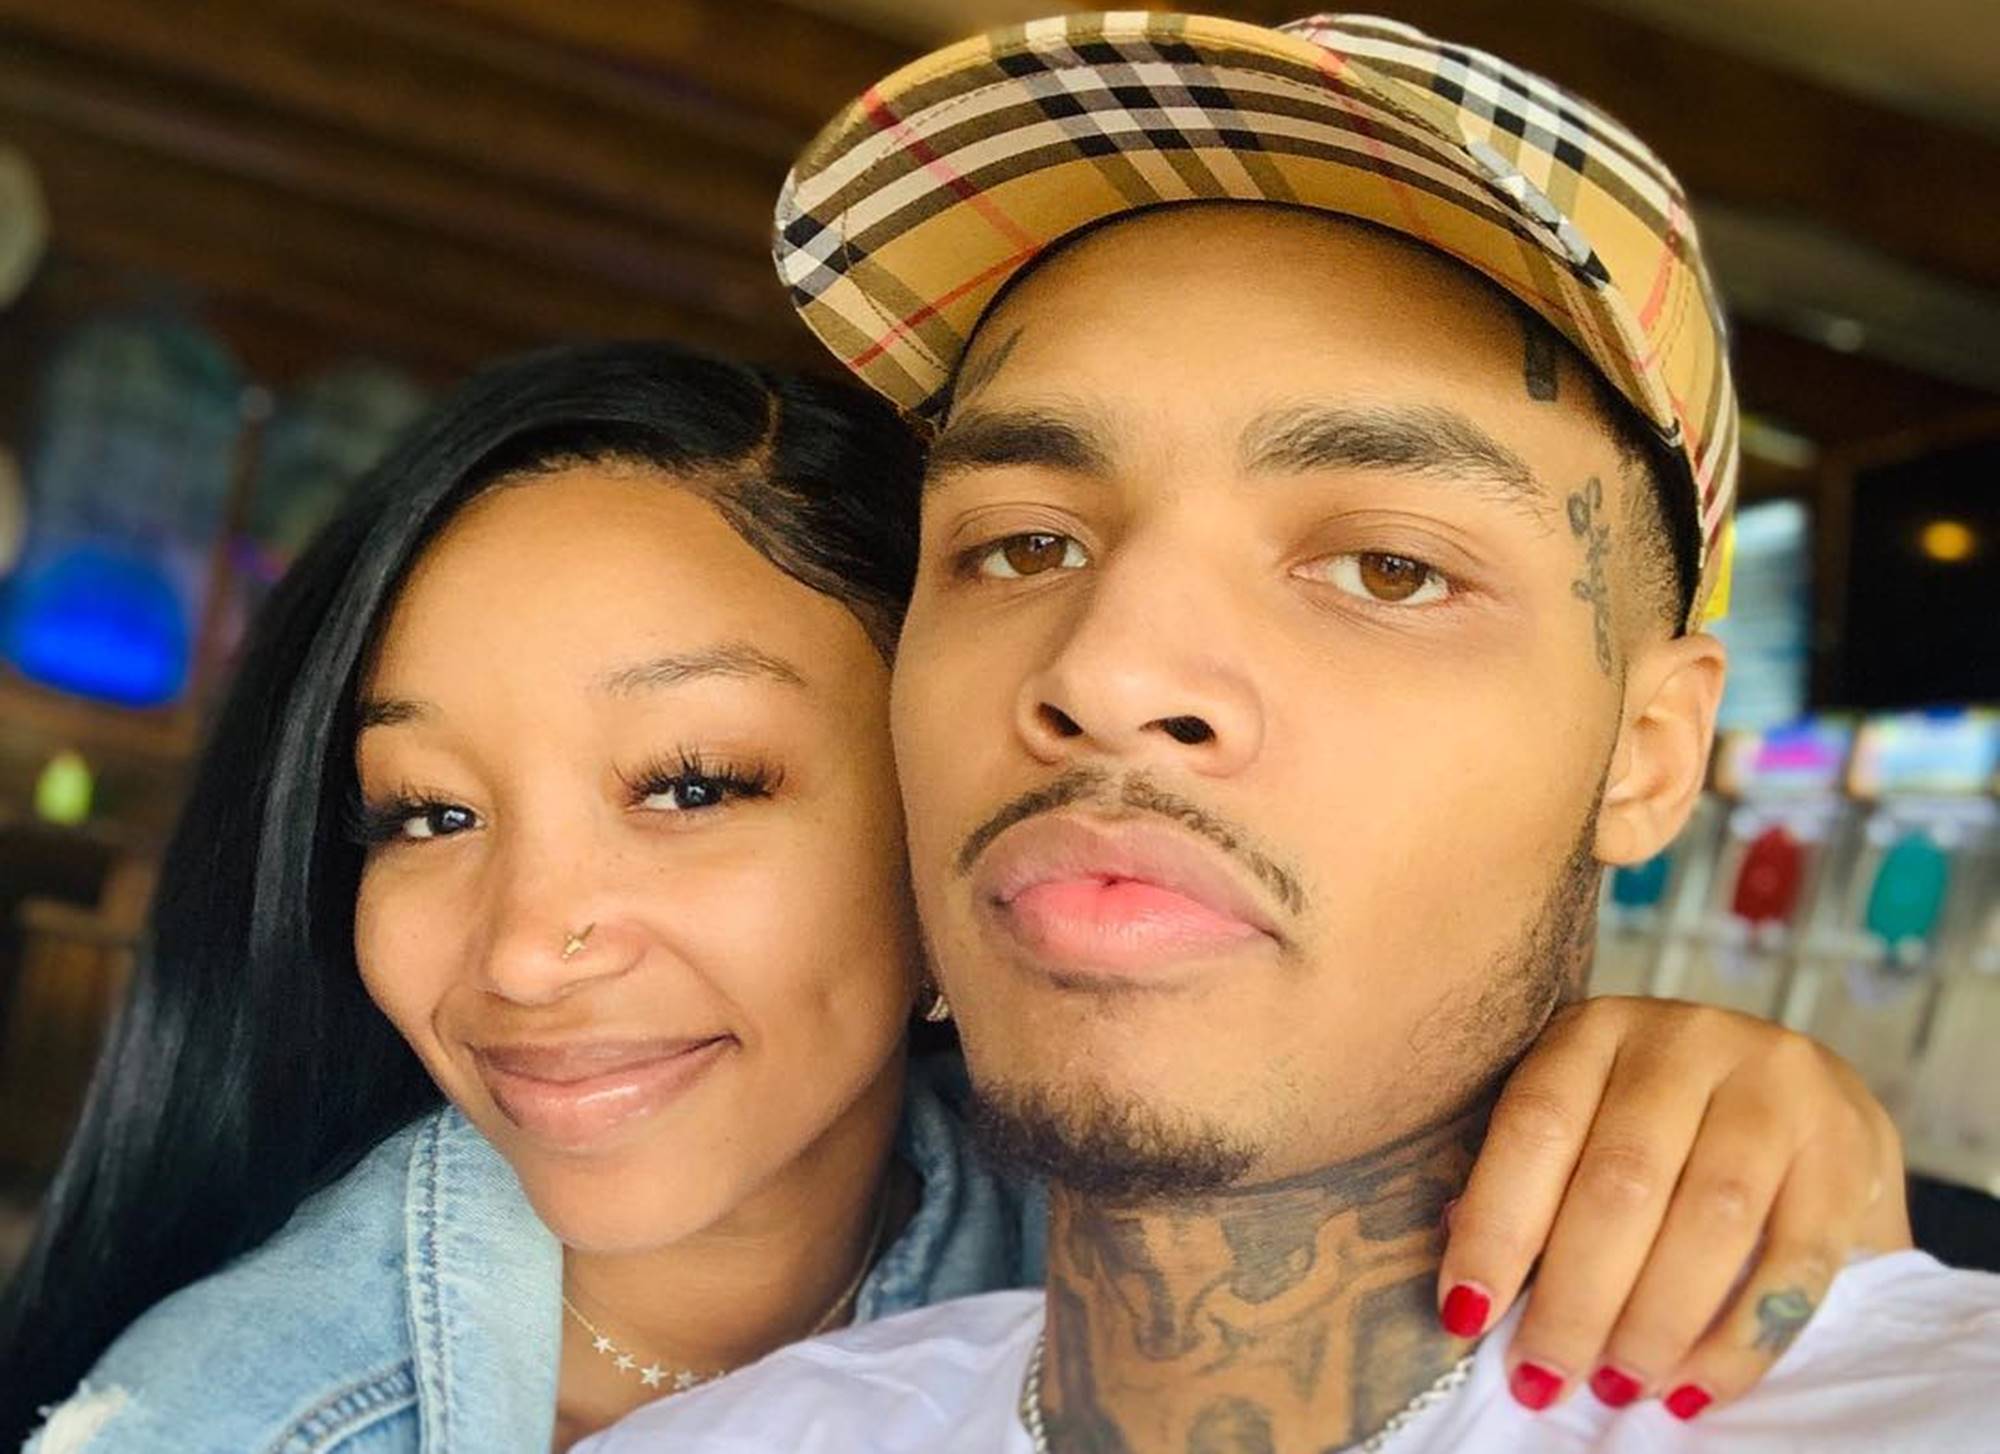 Tiny Harris' Daughter Zonnique Pullins Celebrates The Birthday Of Her BF, Bandhunta Izzy With An Emotional Message And Gorgeous Pics